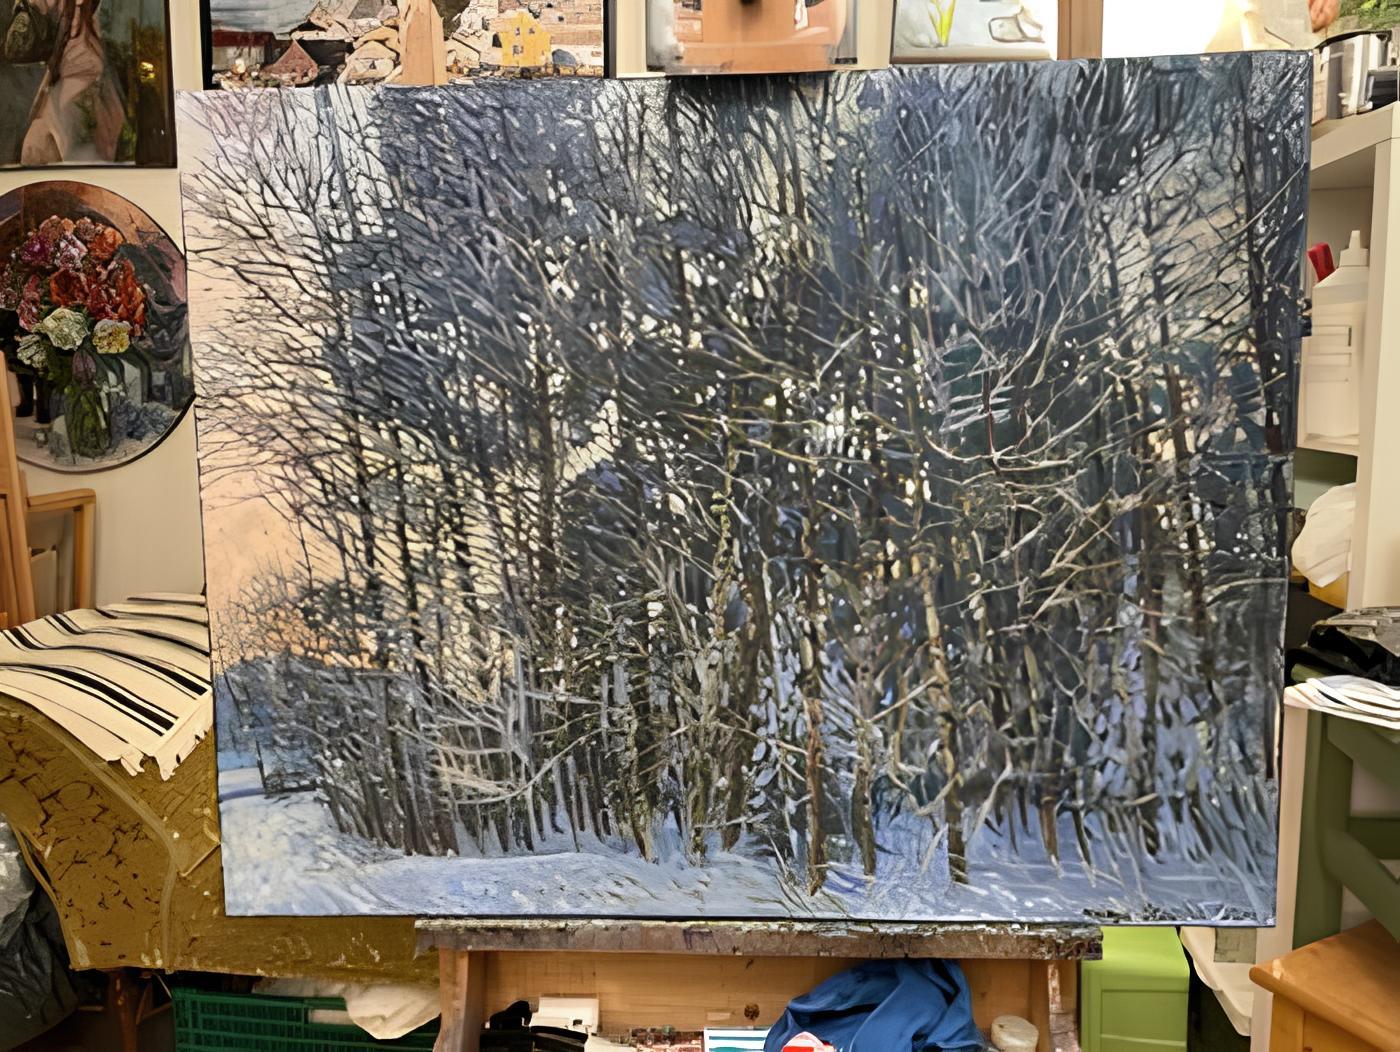 I channeled my love for the serene and the sublime into this oil painting, employing an impressionist style to capture the quiet majesty of a winter's embrace. My brushstrokes danced across the canvas, intertwining shades of cool blues and earthen